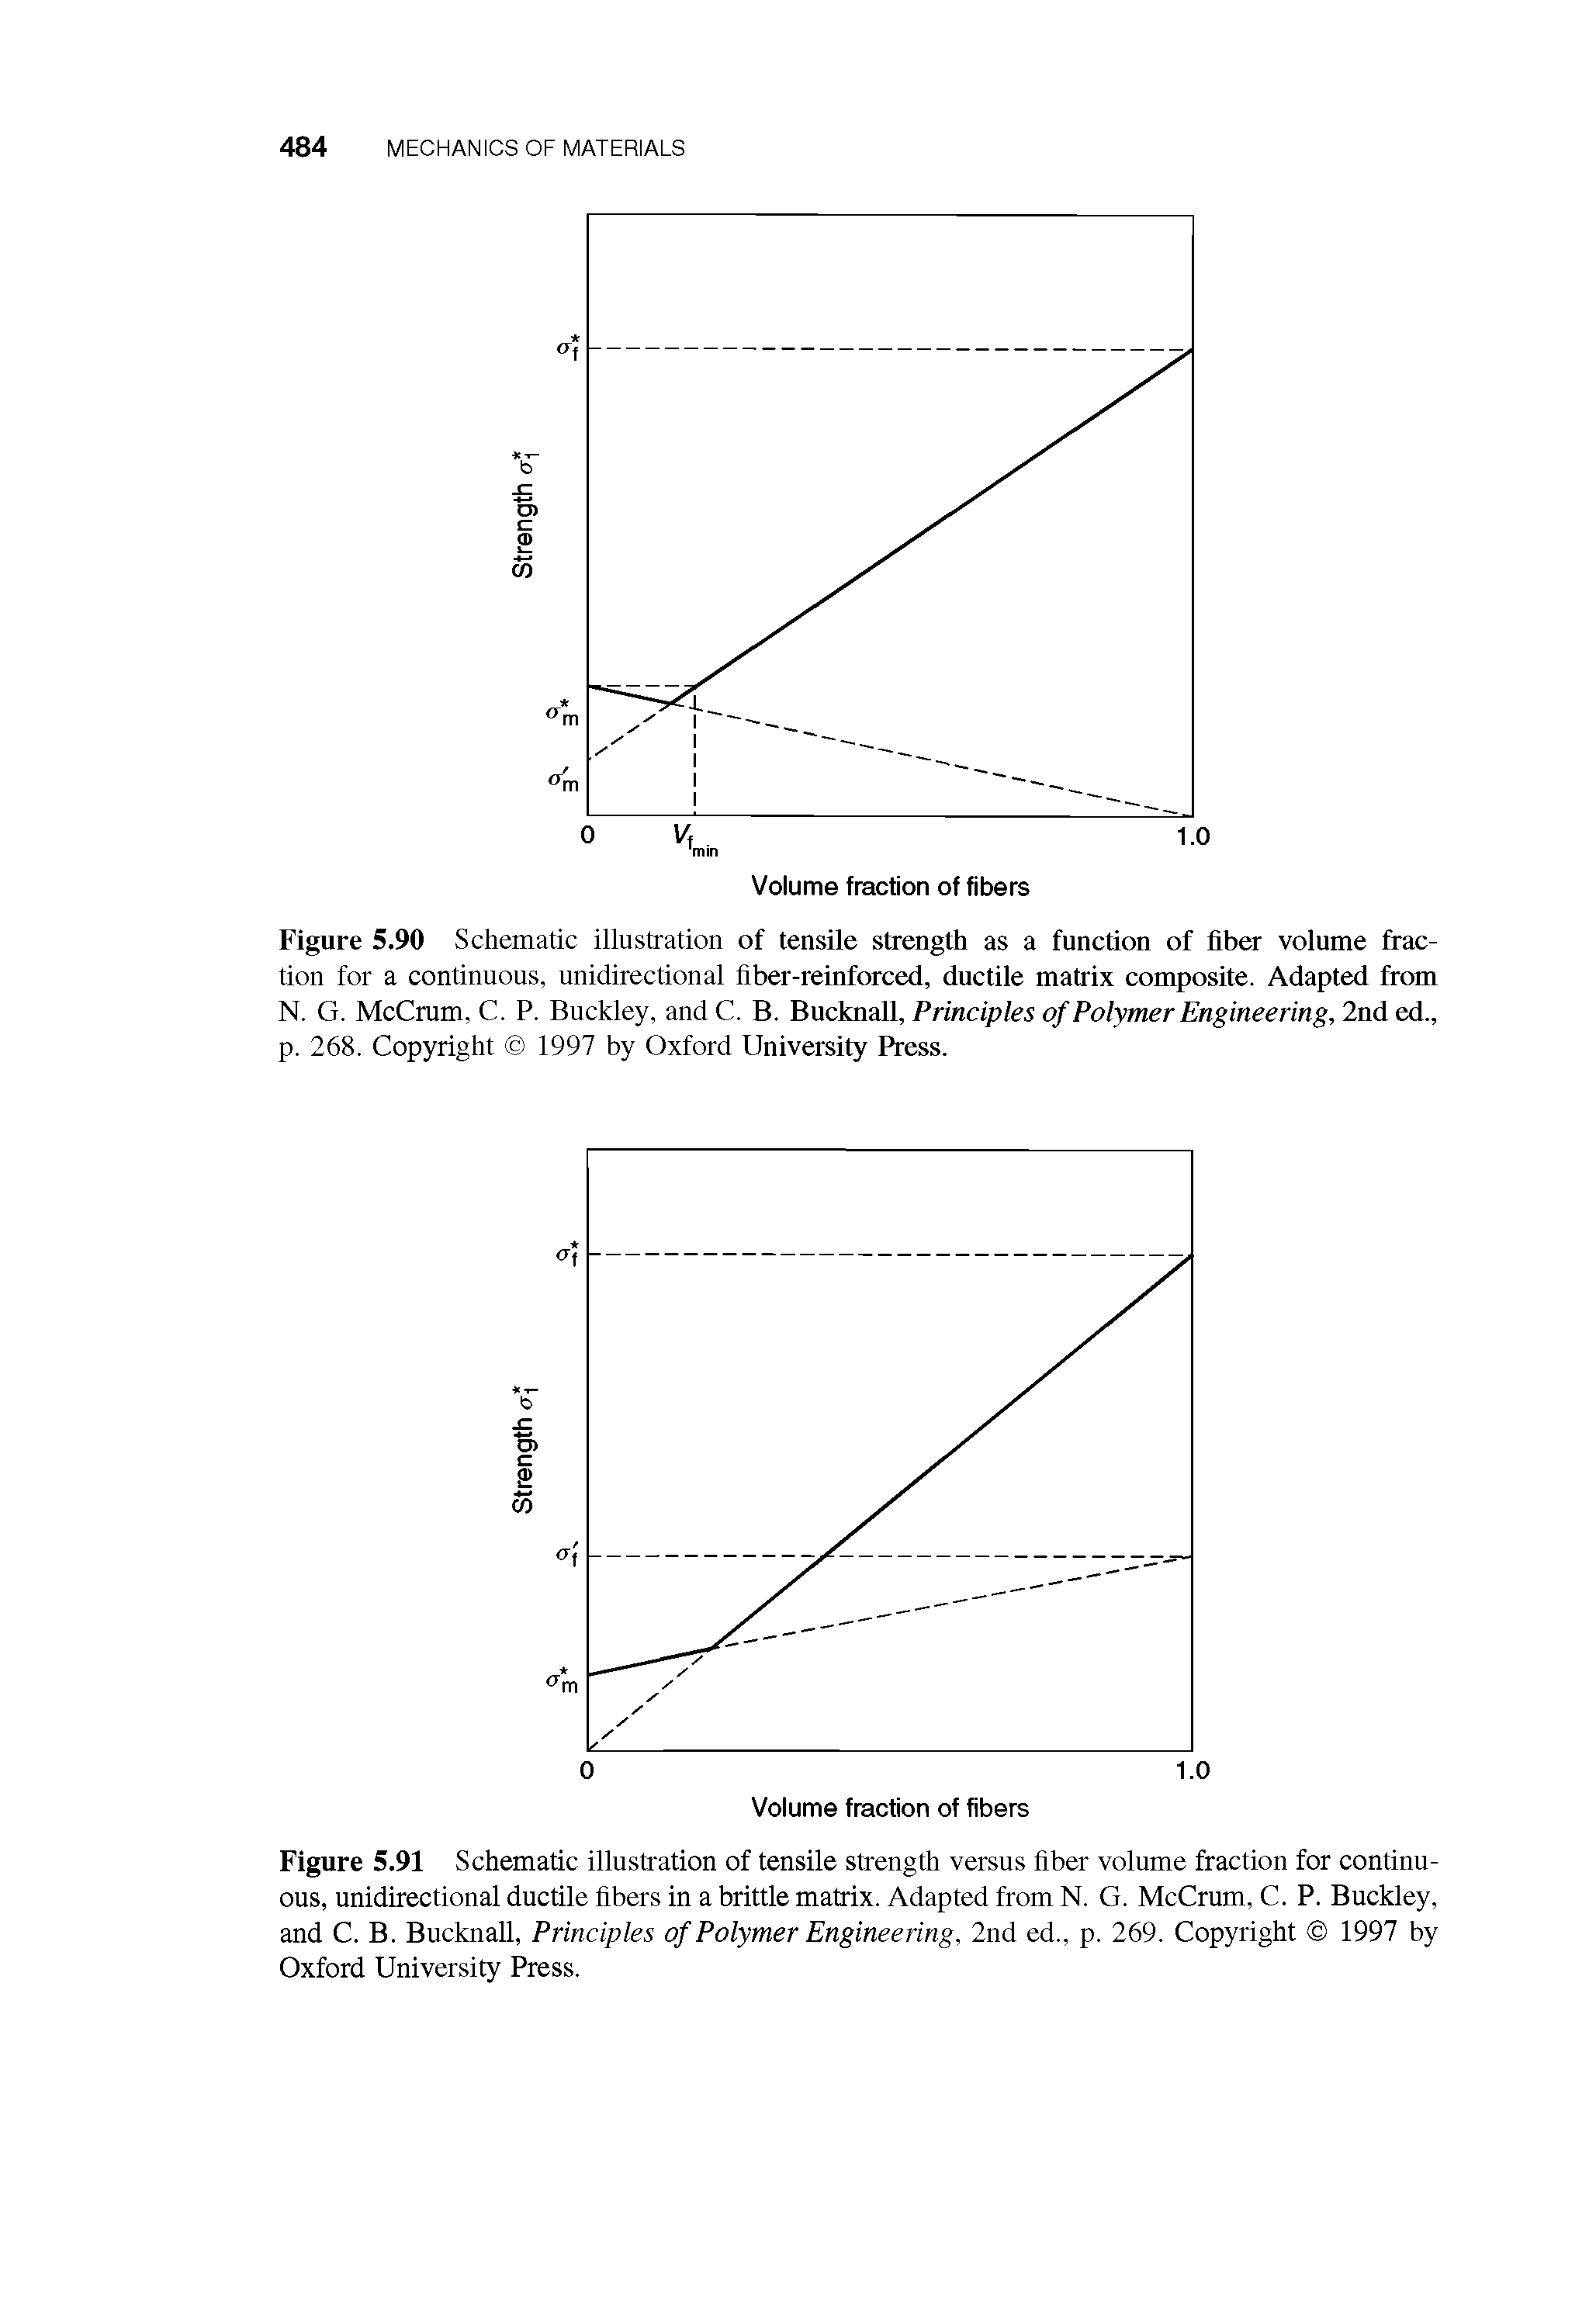 Figure 5.91 Schematic illustration of tensile strength versus fiber volume fraction for continuous, unidirectional ductile fibers in a brittle matrix. Adapted from N. G. McCrum, C. P. Buckley, and C. B. Bucknall, Principles of Polymer Engineering, 2nd ed., p. 269. Copyright 1997 by Oxford University Press.